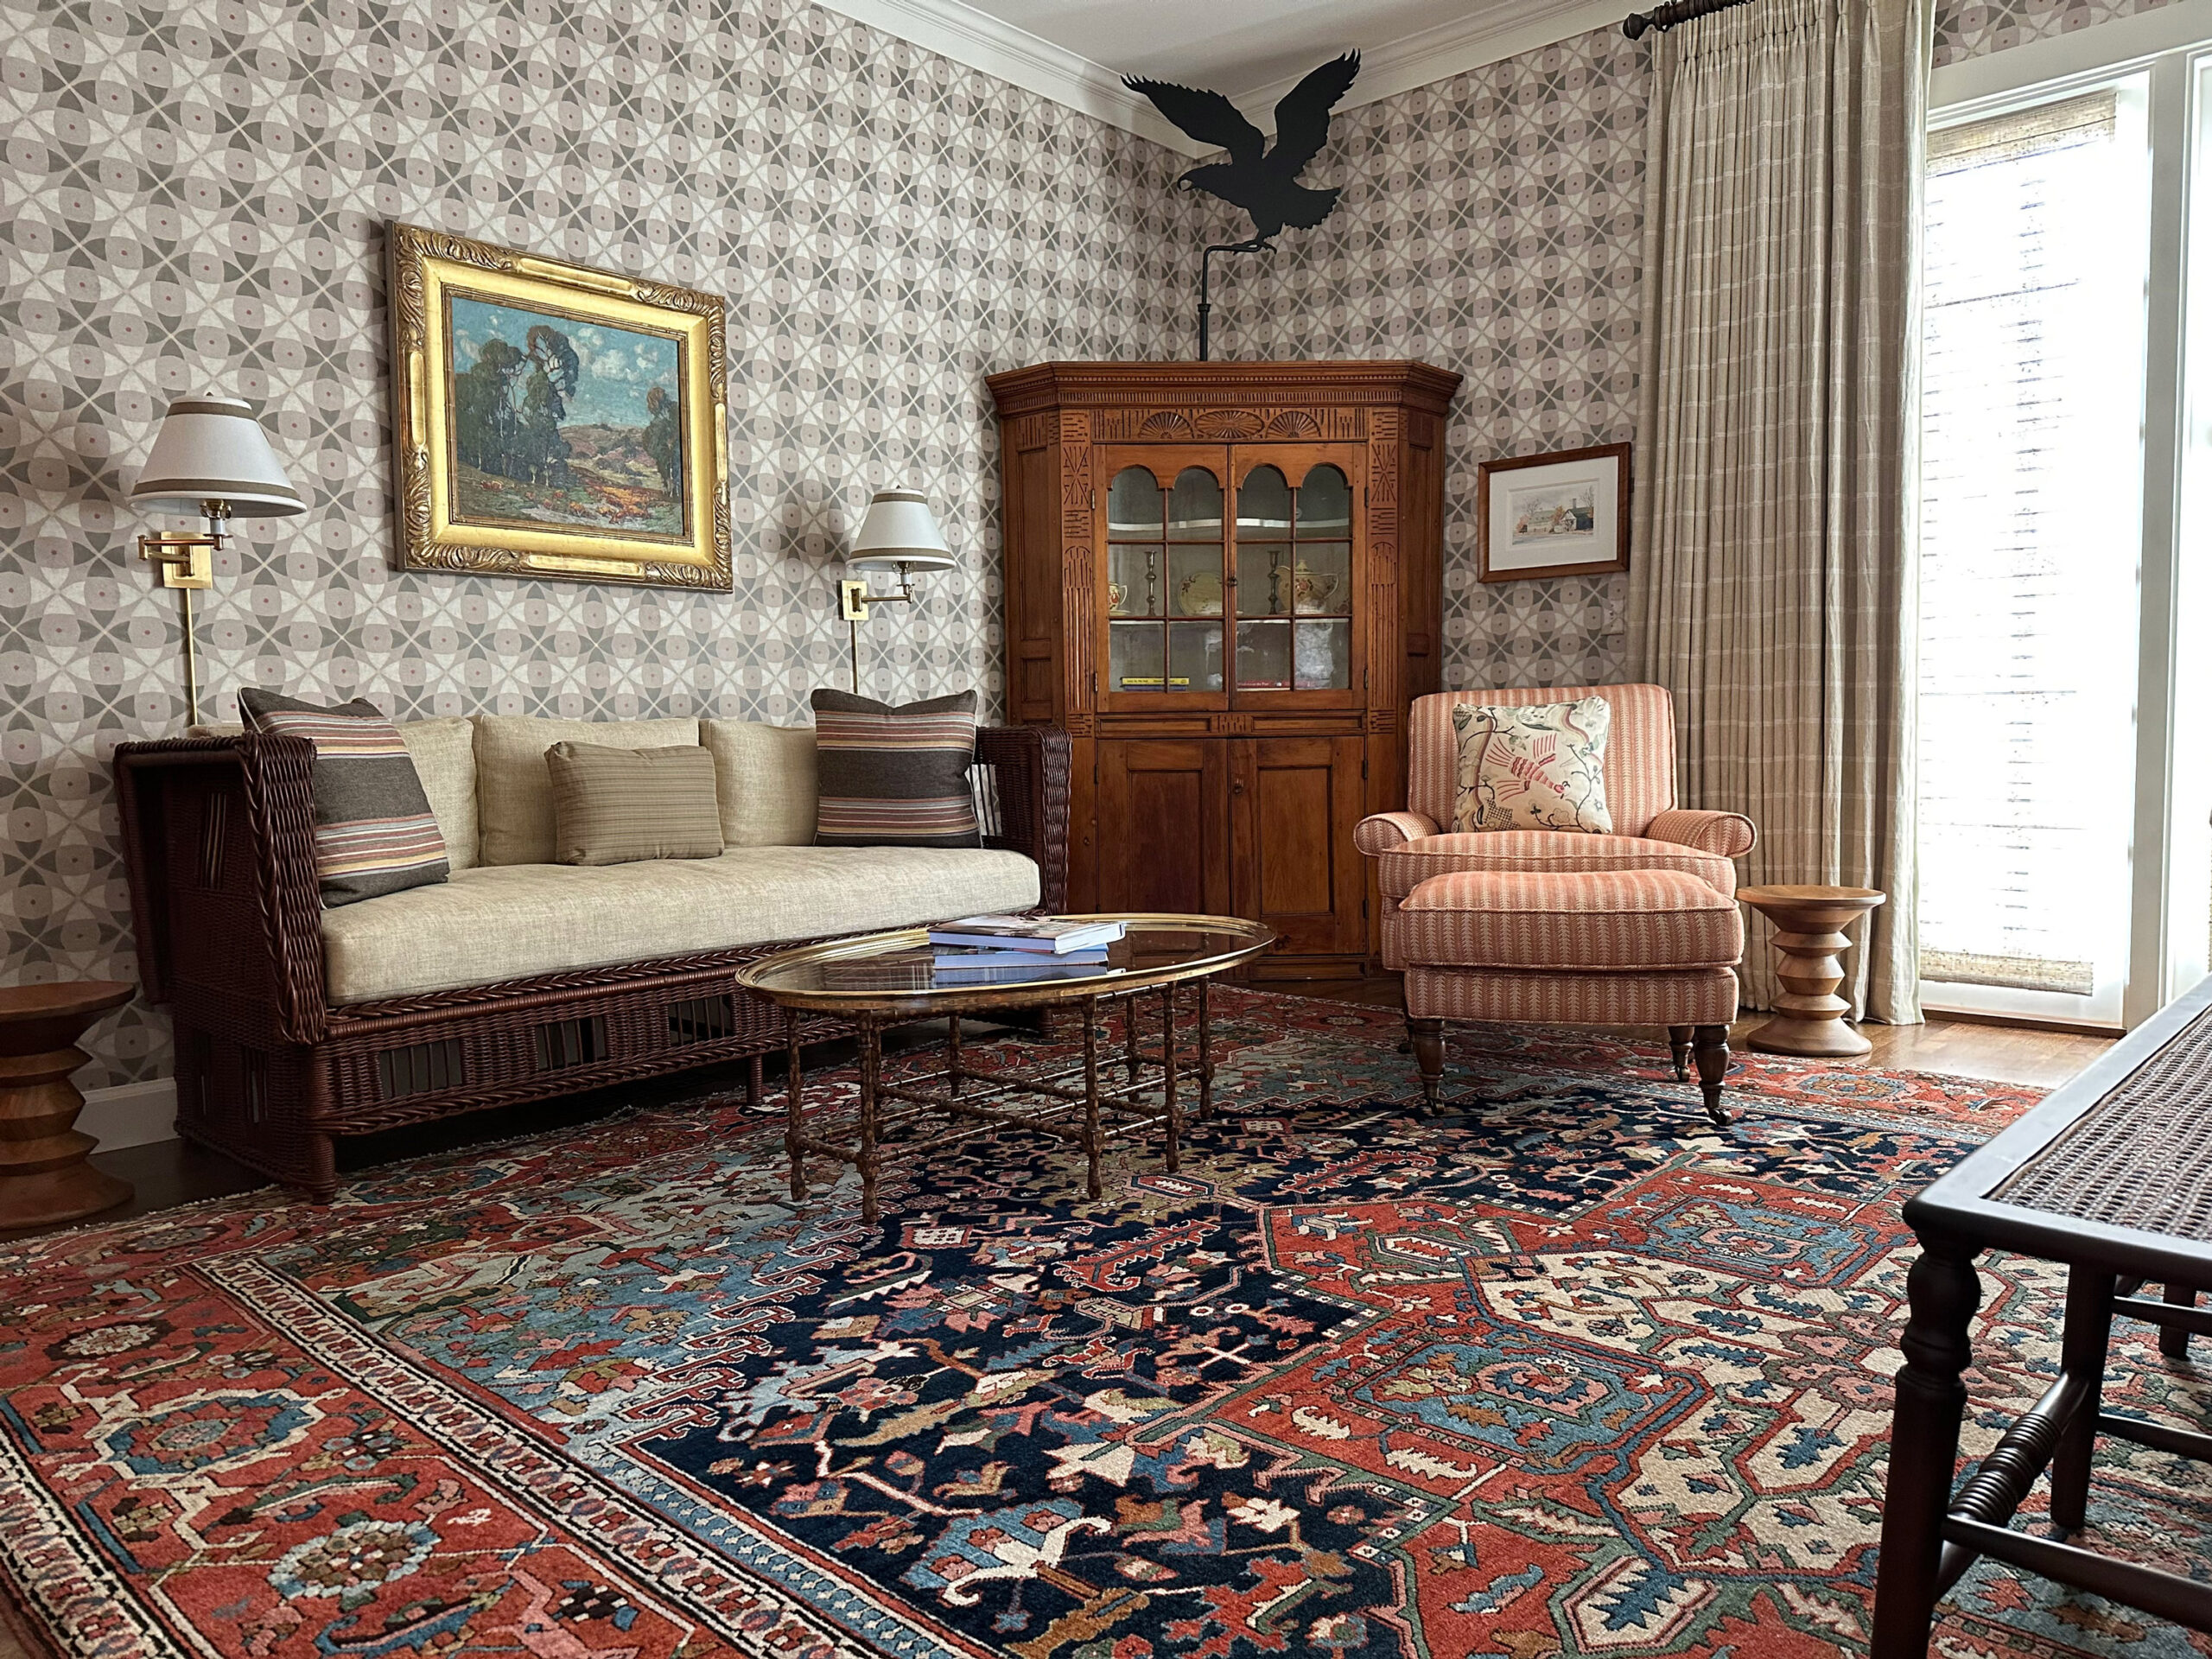 An antique Persian Heriz carpet in the living room of a California family home - Douglas Stock Gallery